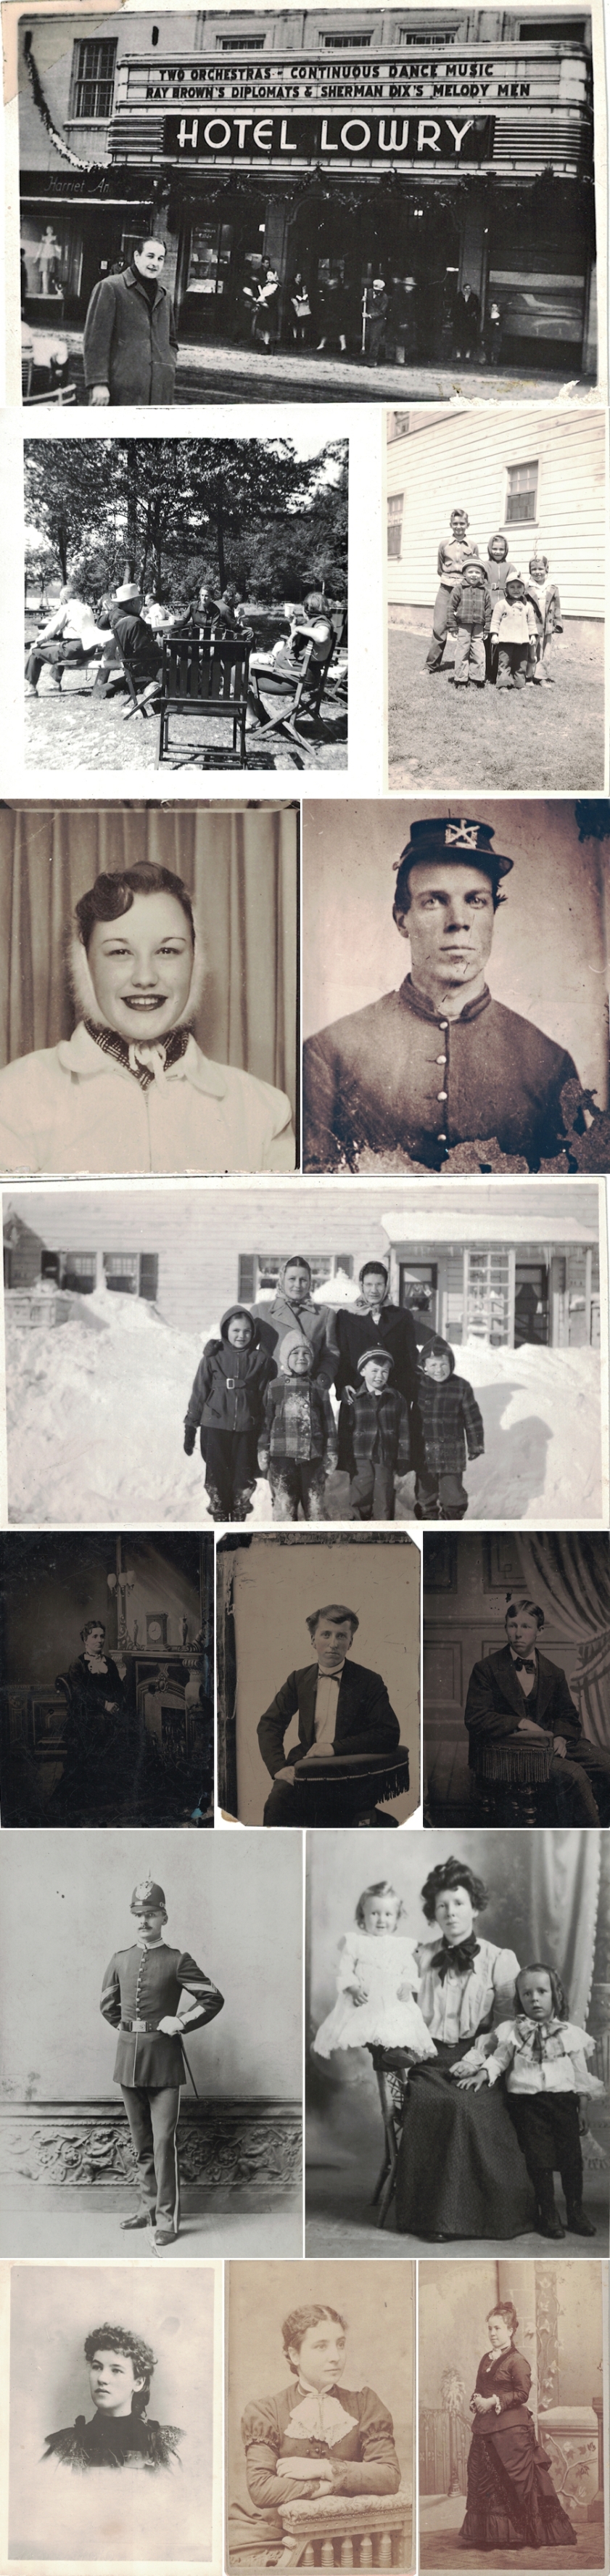 restoration and archival photography services Jonathan Betz Photography Colorado Springs Photographer 1